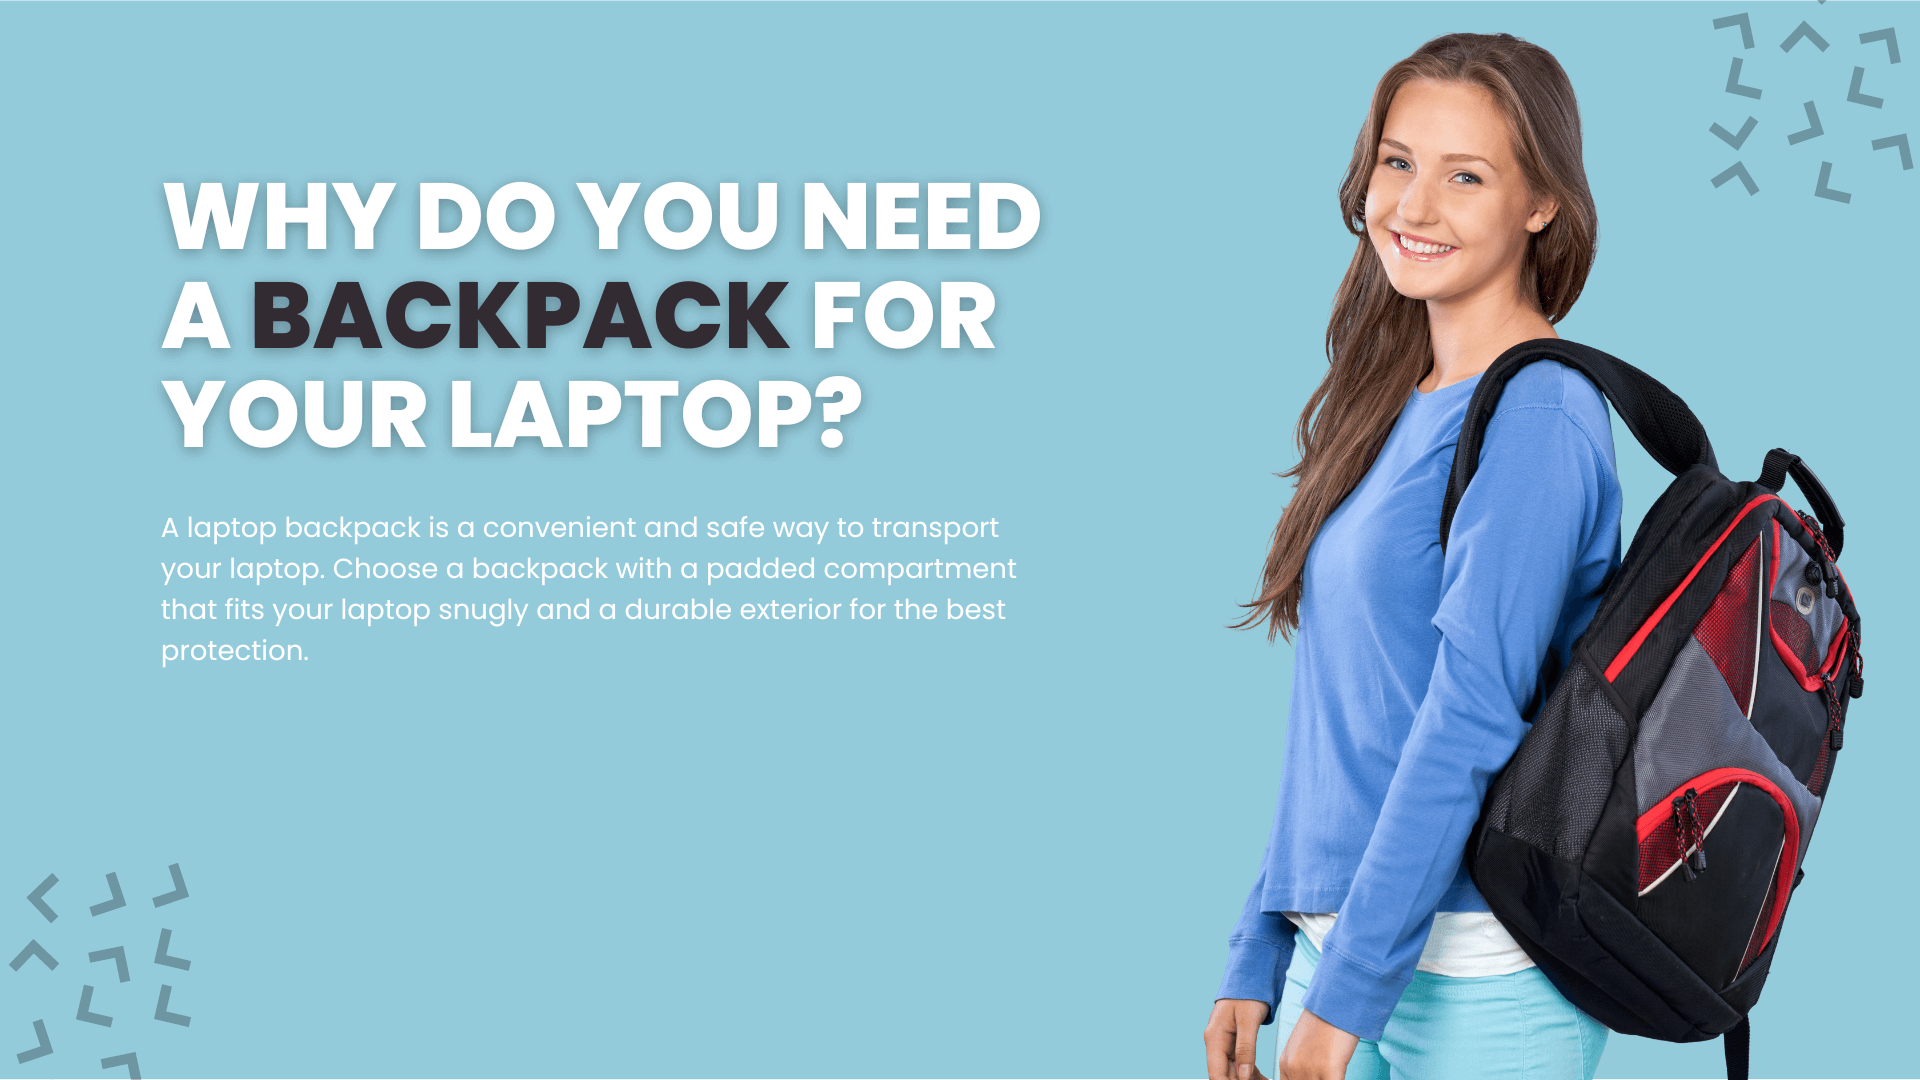 Why do you need a backpack for your laptop?